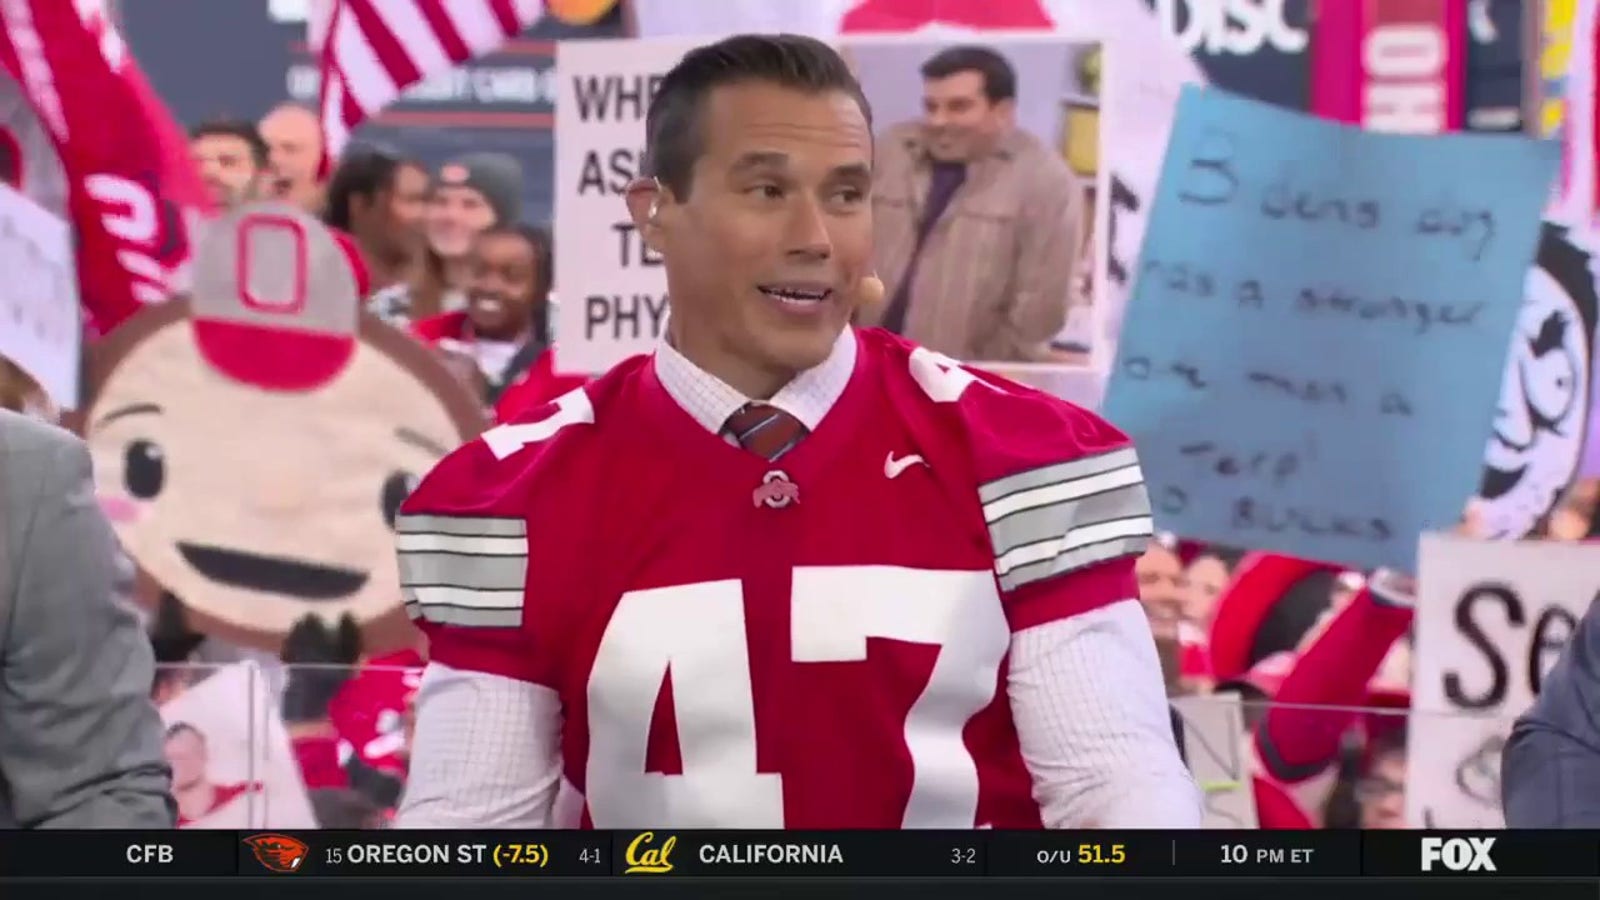 Urban Meyer starts 'Big Noon Kickoff' with a 'OH-IO' chant and Brady Quinn wears an Ohio State Jersey after losing bet 